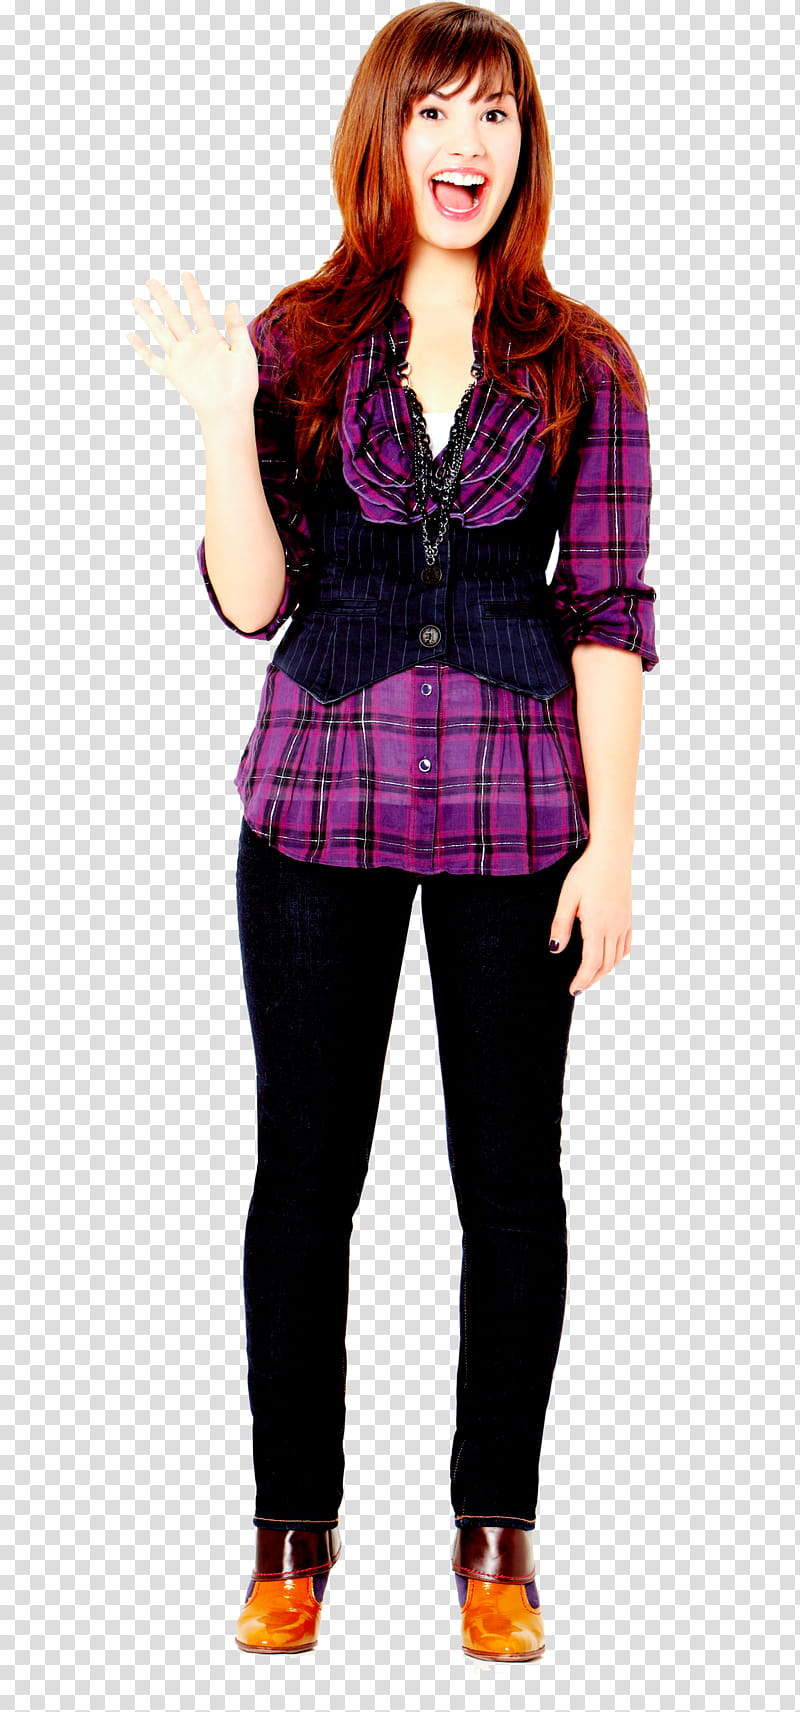 Demi Lovato s, smiling woman while standing and waving her hand transparent background PNG clipart